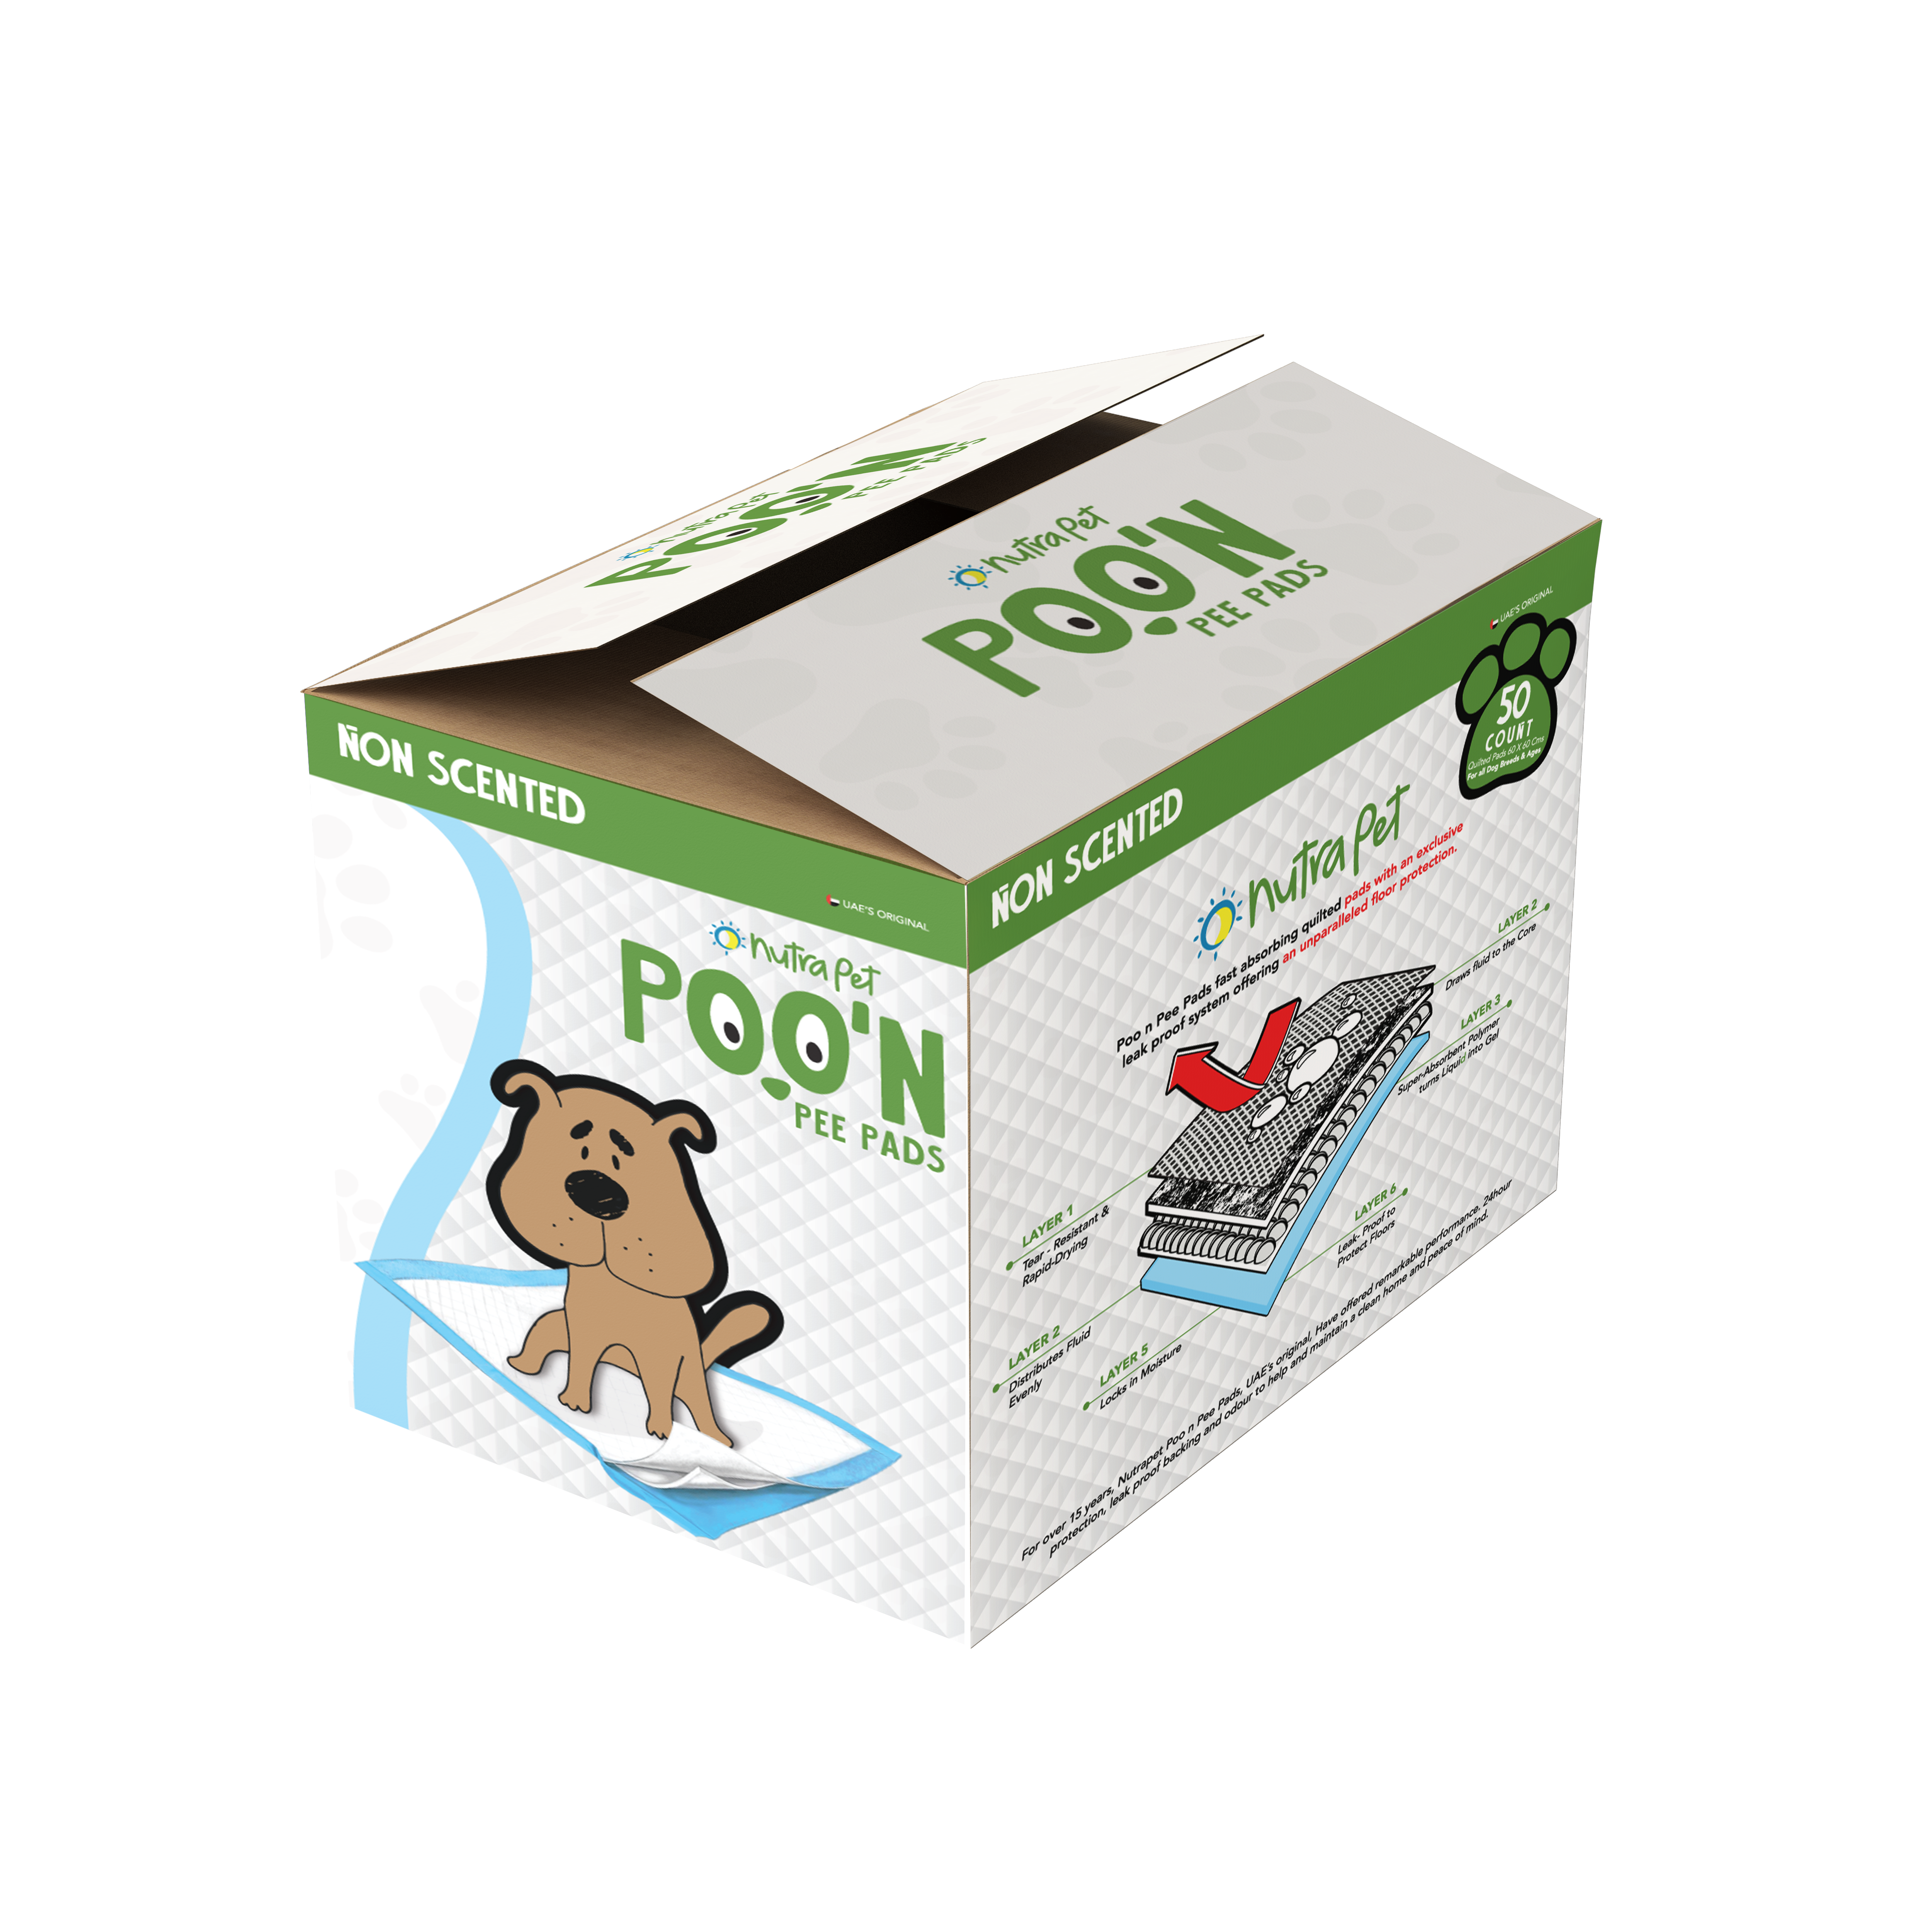 NutraPet Poo N Pee Pads Original 60 Cms X 60 Cms 5 X Absorption With Floor Mat Stickers - 50 Count LARGE